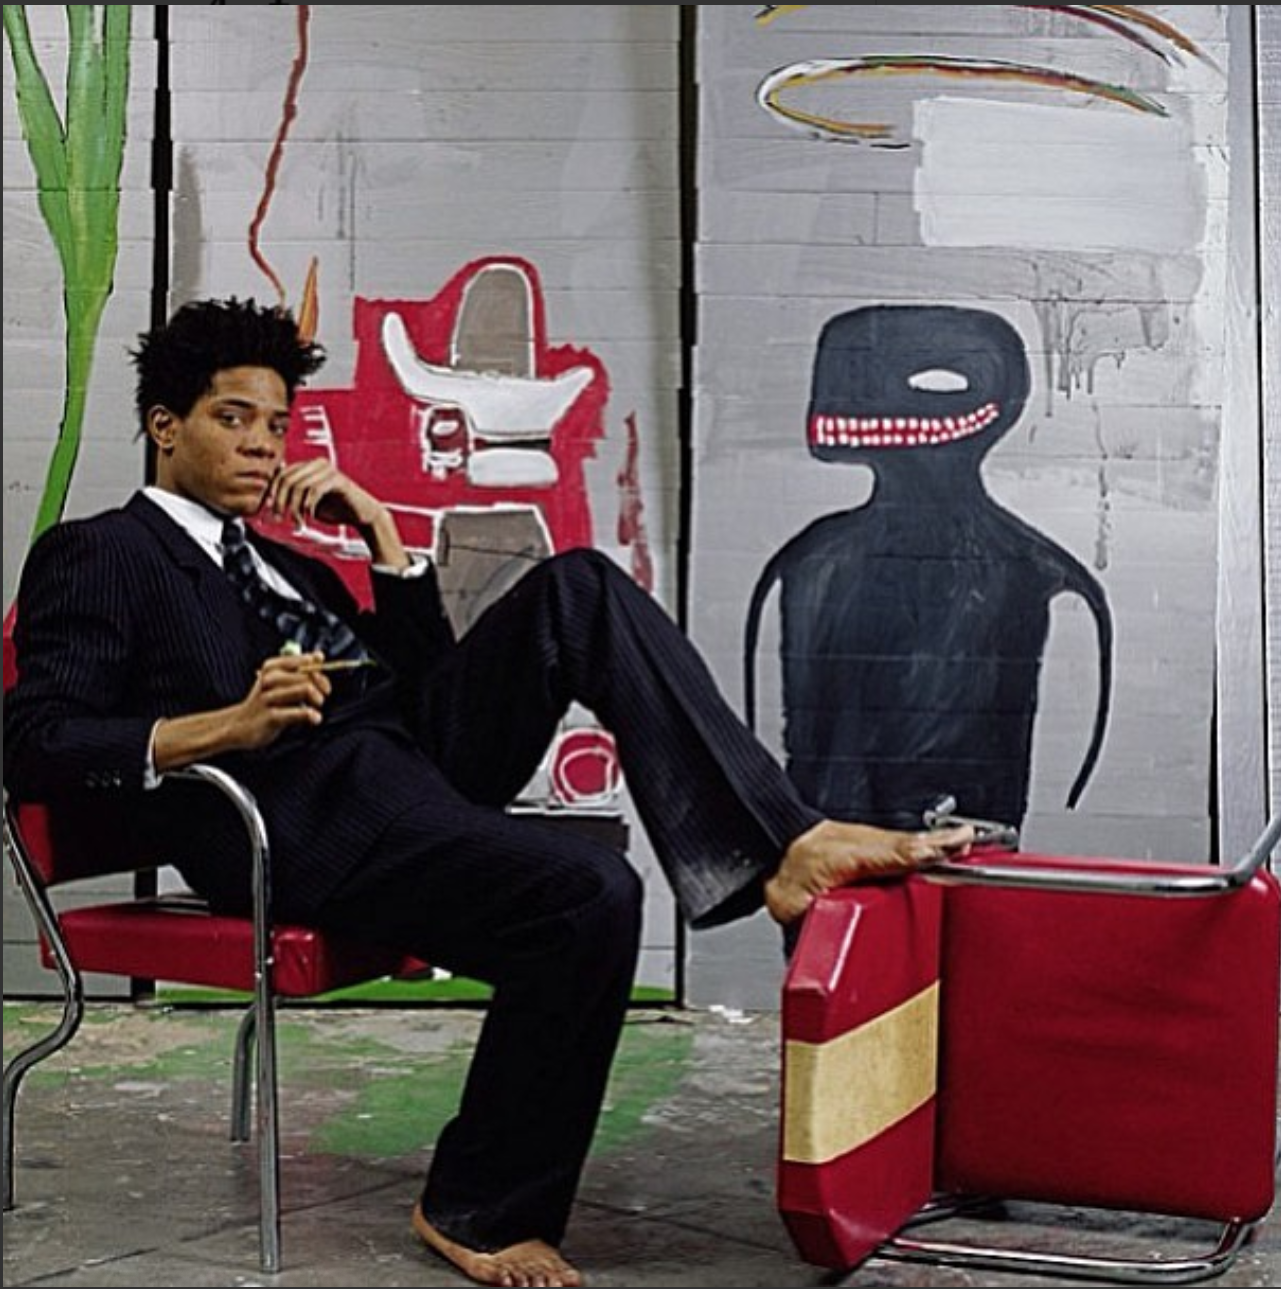 Basquiat sitting on a chair without shoes, with a leg on another chair. Behind his is his art on a wall.